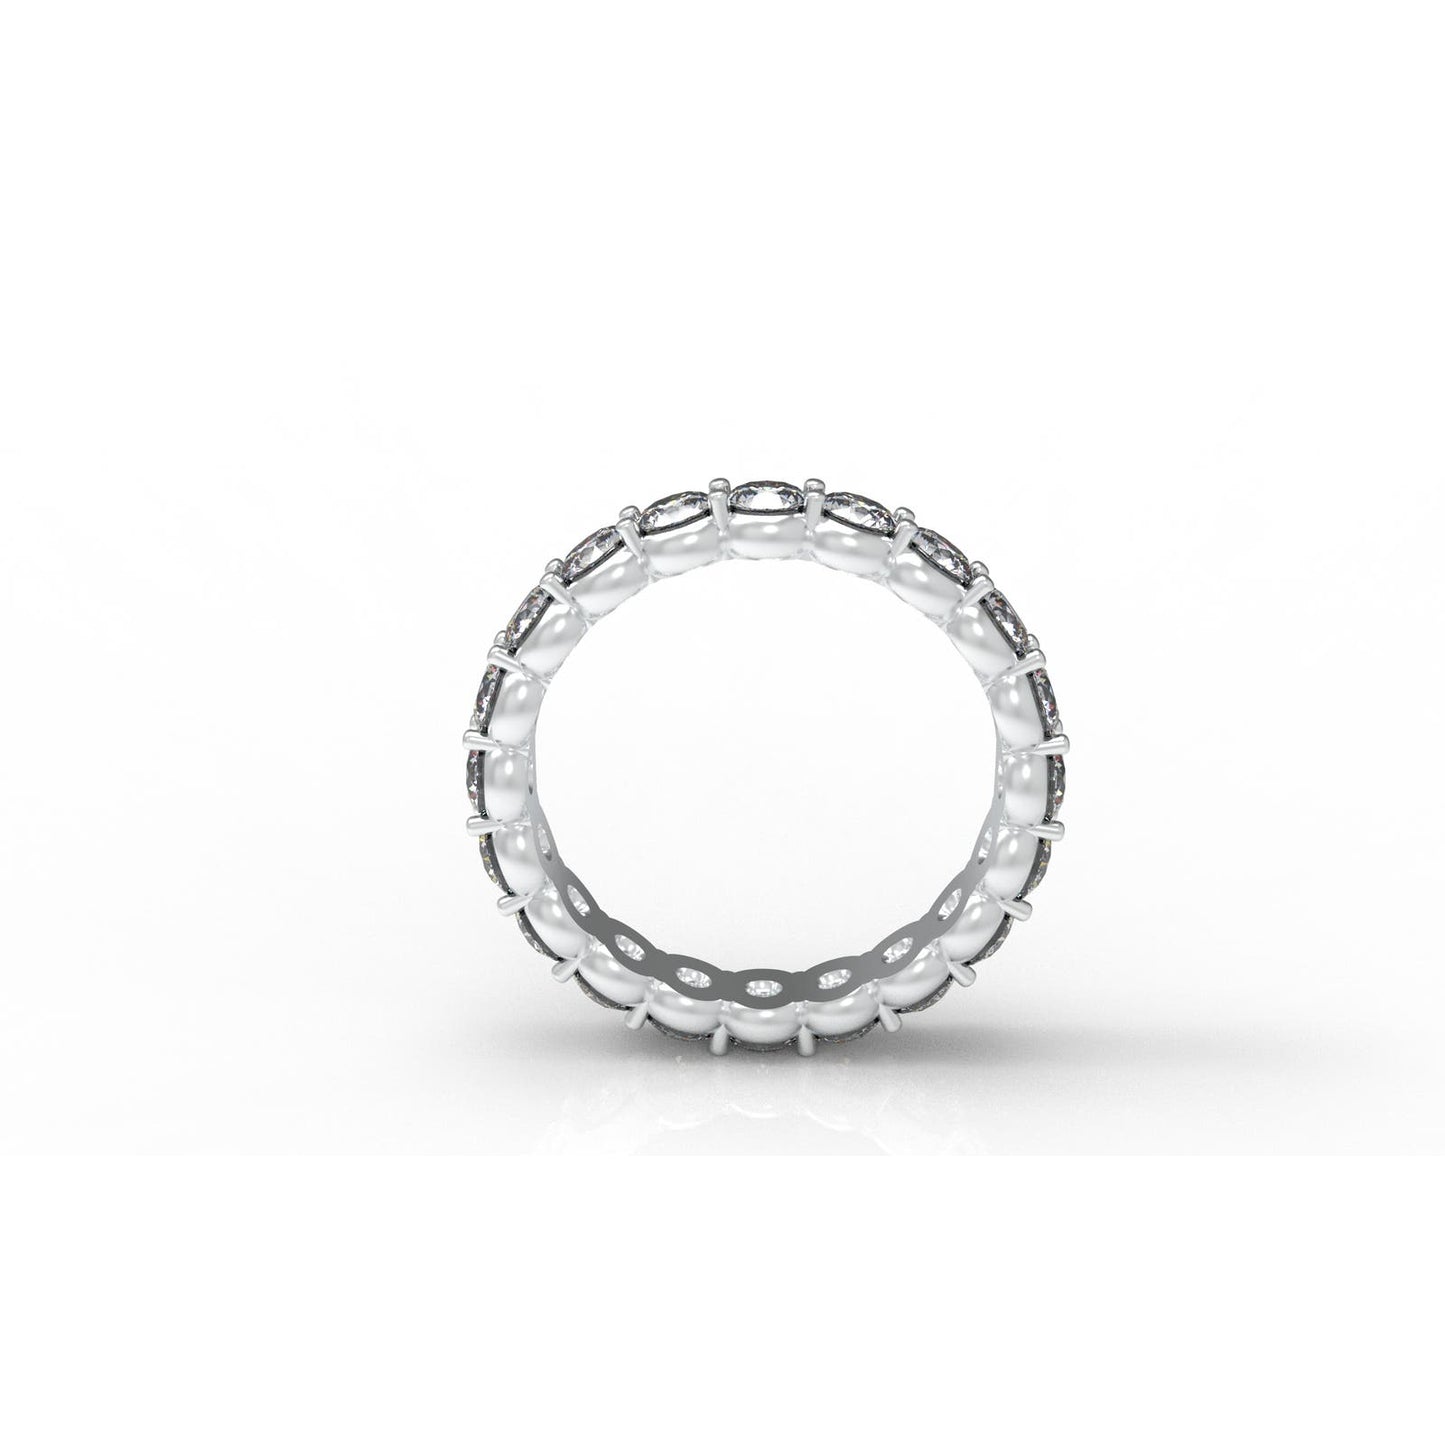 14K White Gold Stackable Ring with 1.55 Ct Round Brilliant Cut Diamonds - Size 5